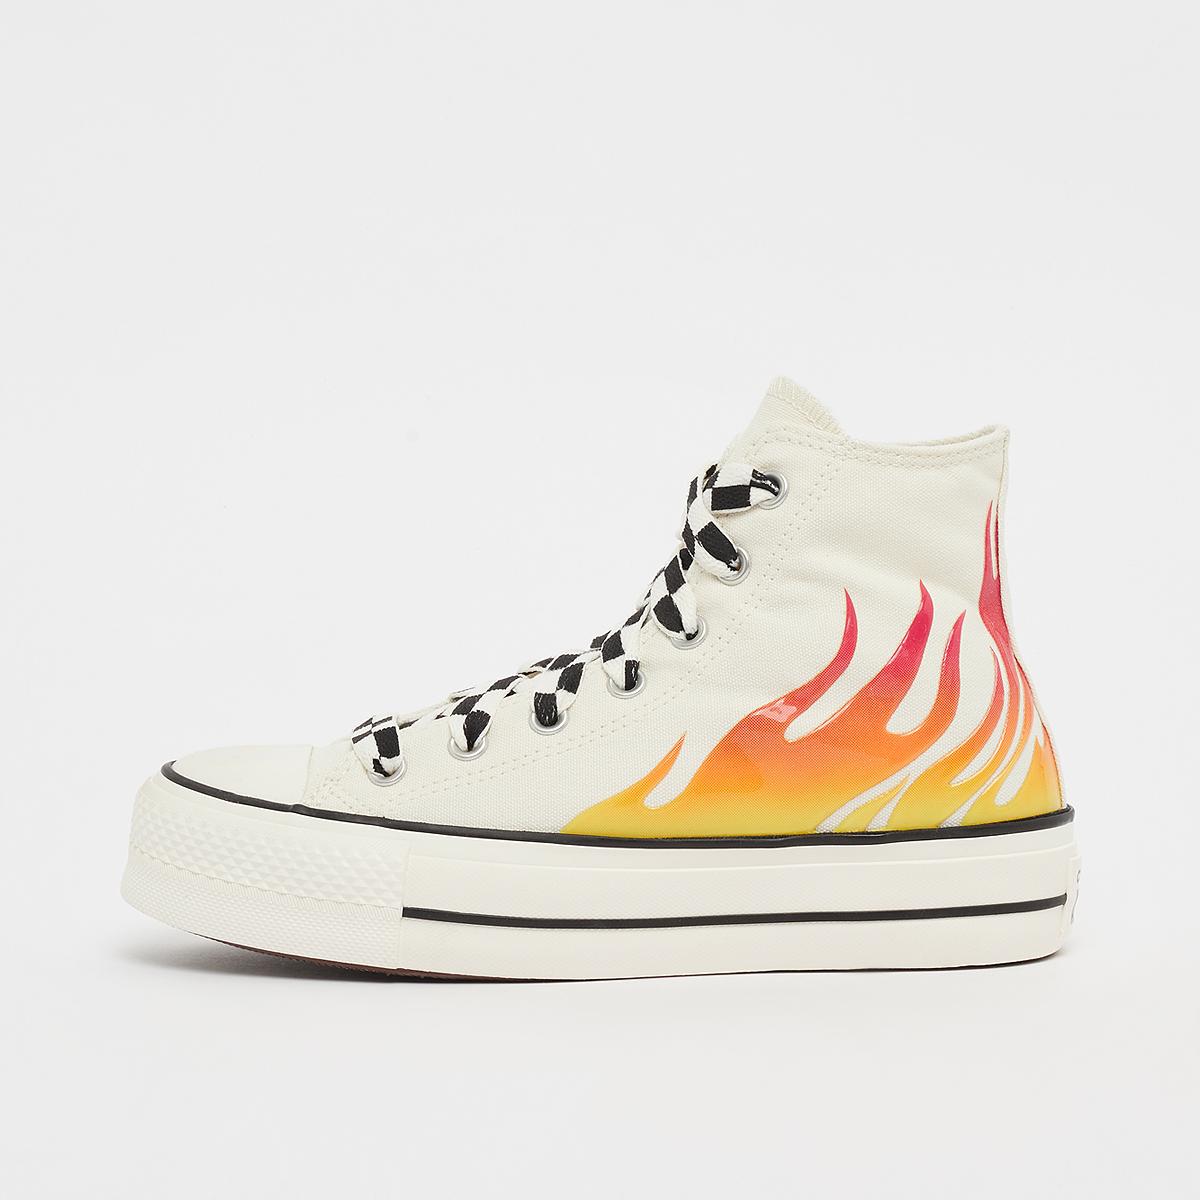 Chuck Taylor All Star, Converse, Footwear, lift egret/enamel red/black, taille: 36.5